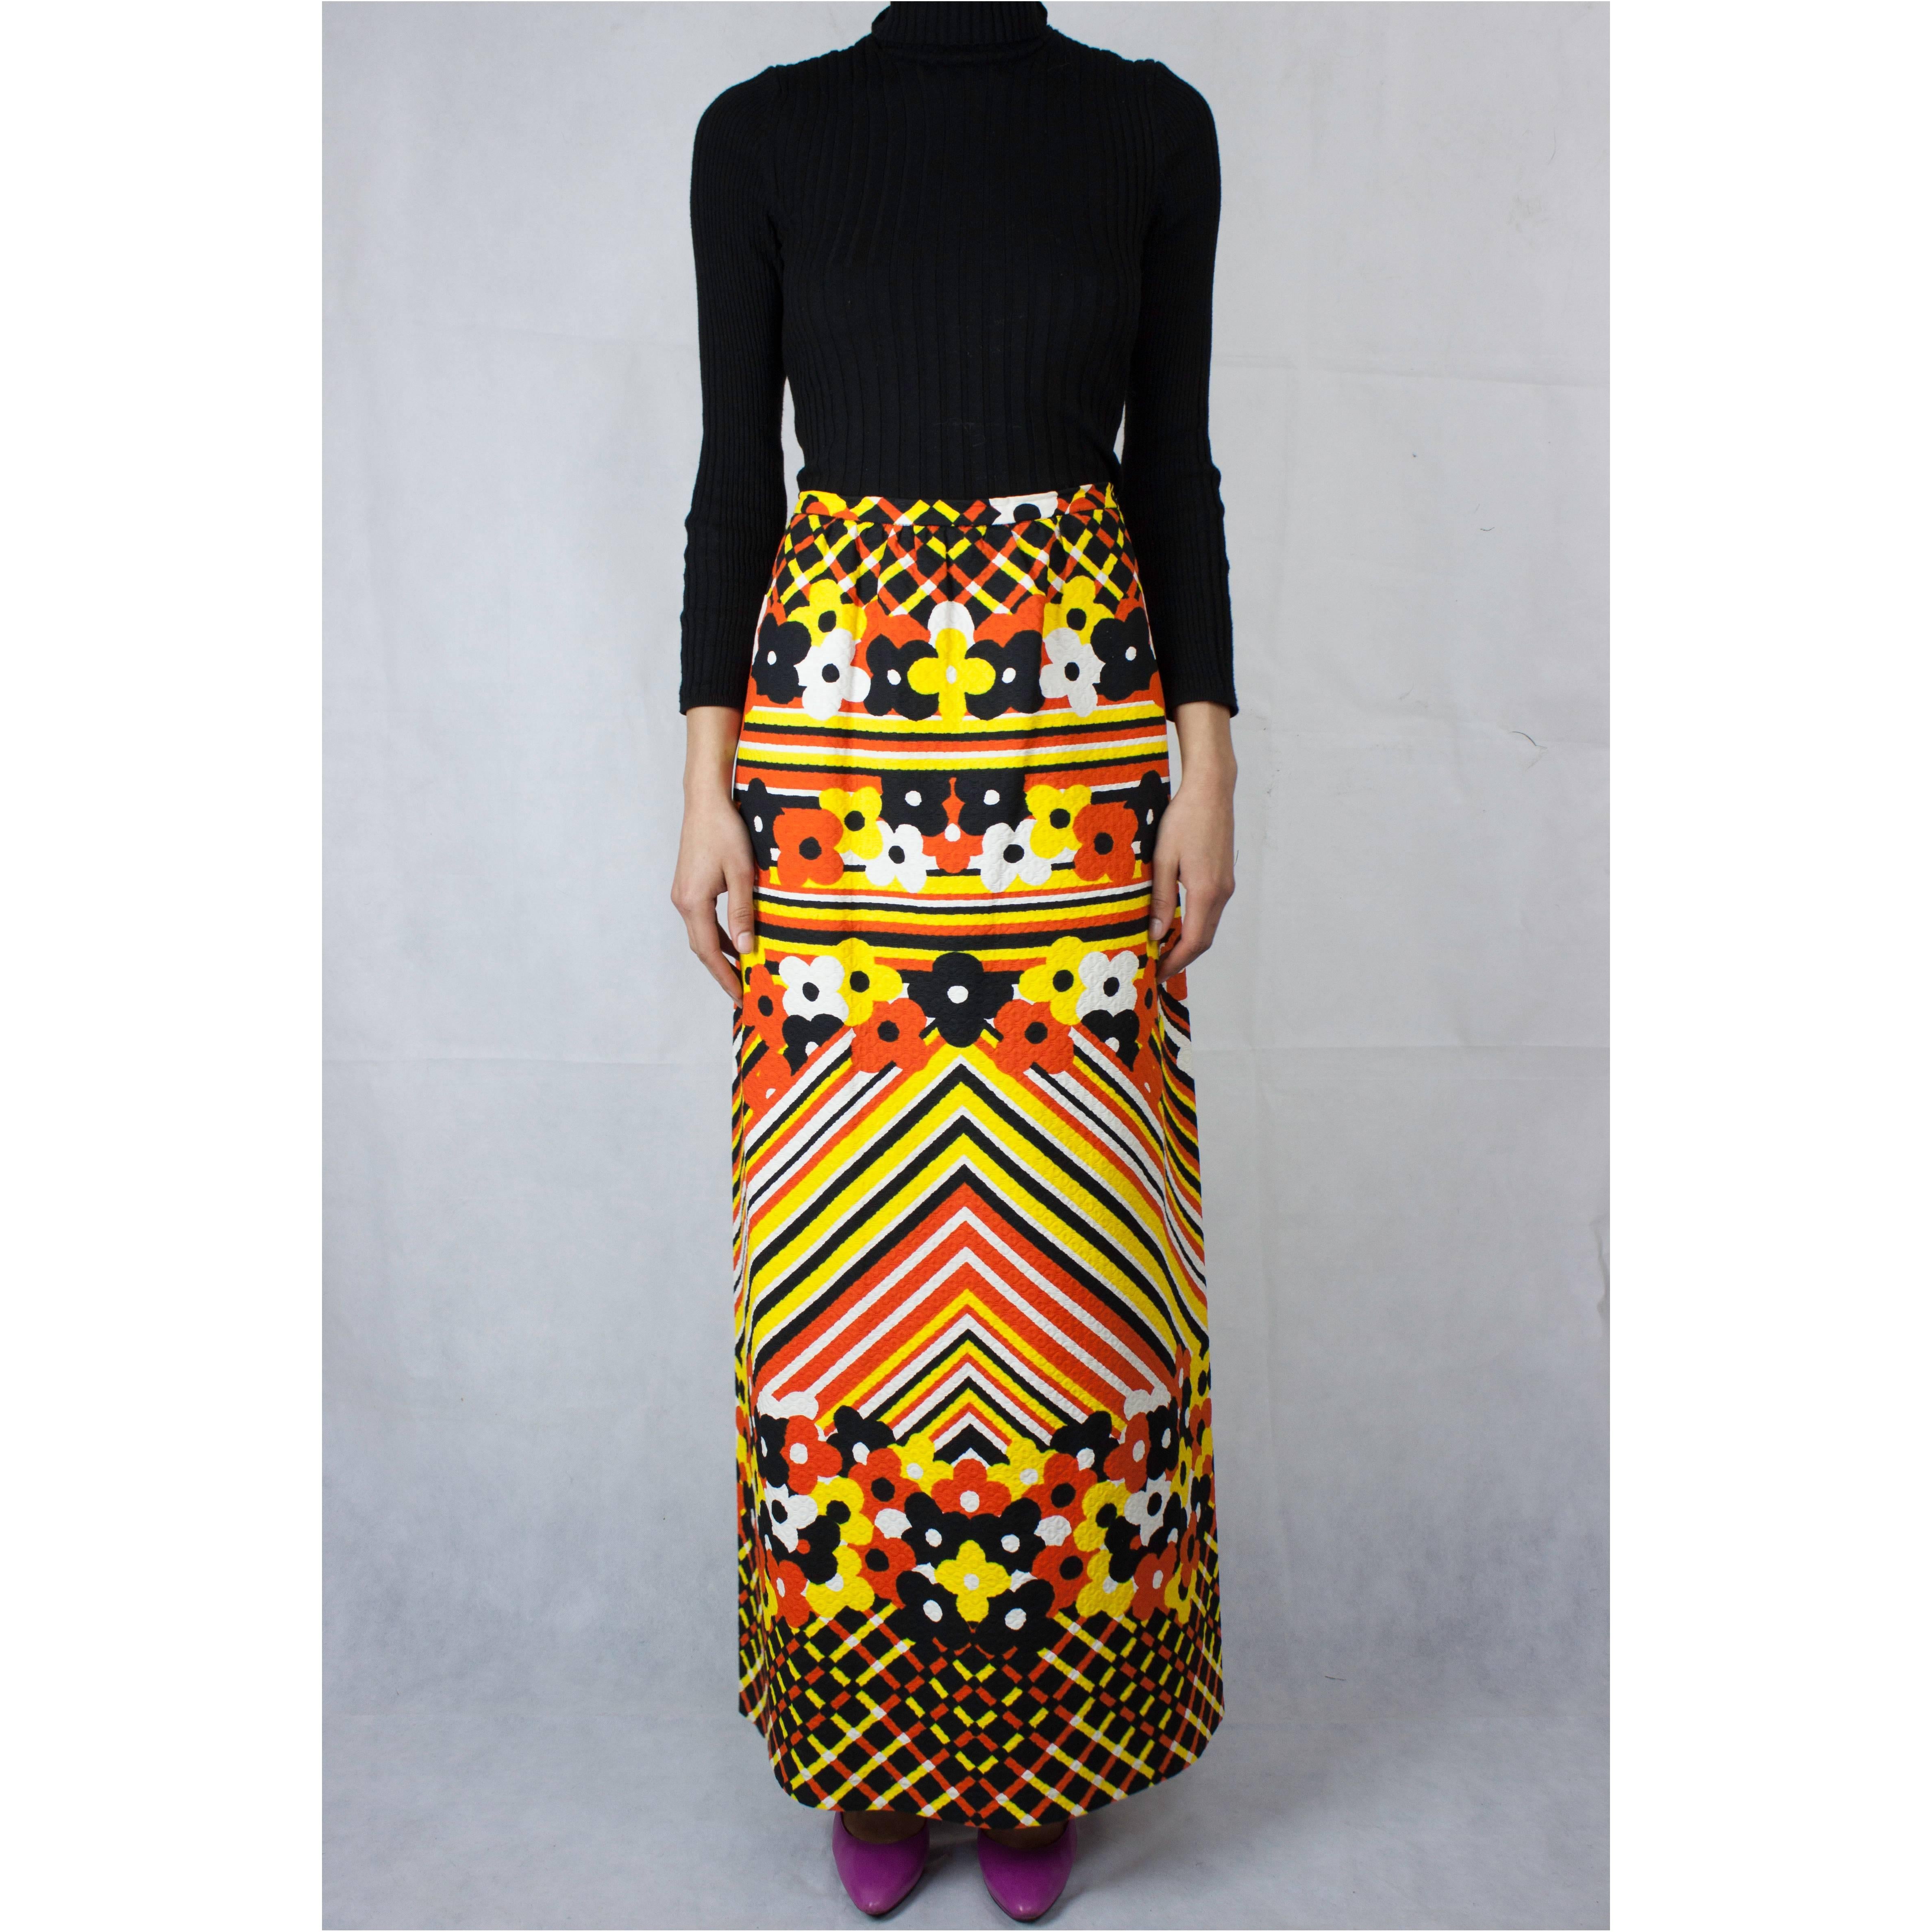 
In the 1970s the maxi replaced the mini. Freedom was in the air and prints were a staple. This piqué maxi skirt from Lanvin is an important example of the hippie look that was transformed into chic collections by Western fashion houses.
This maxi